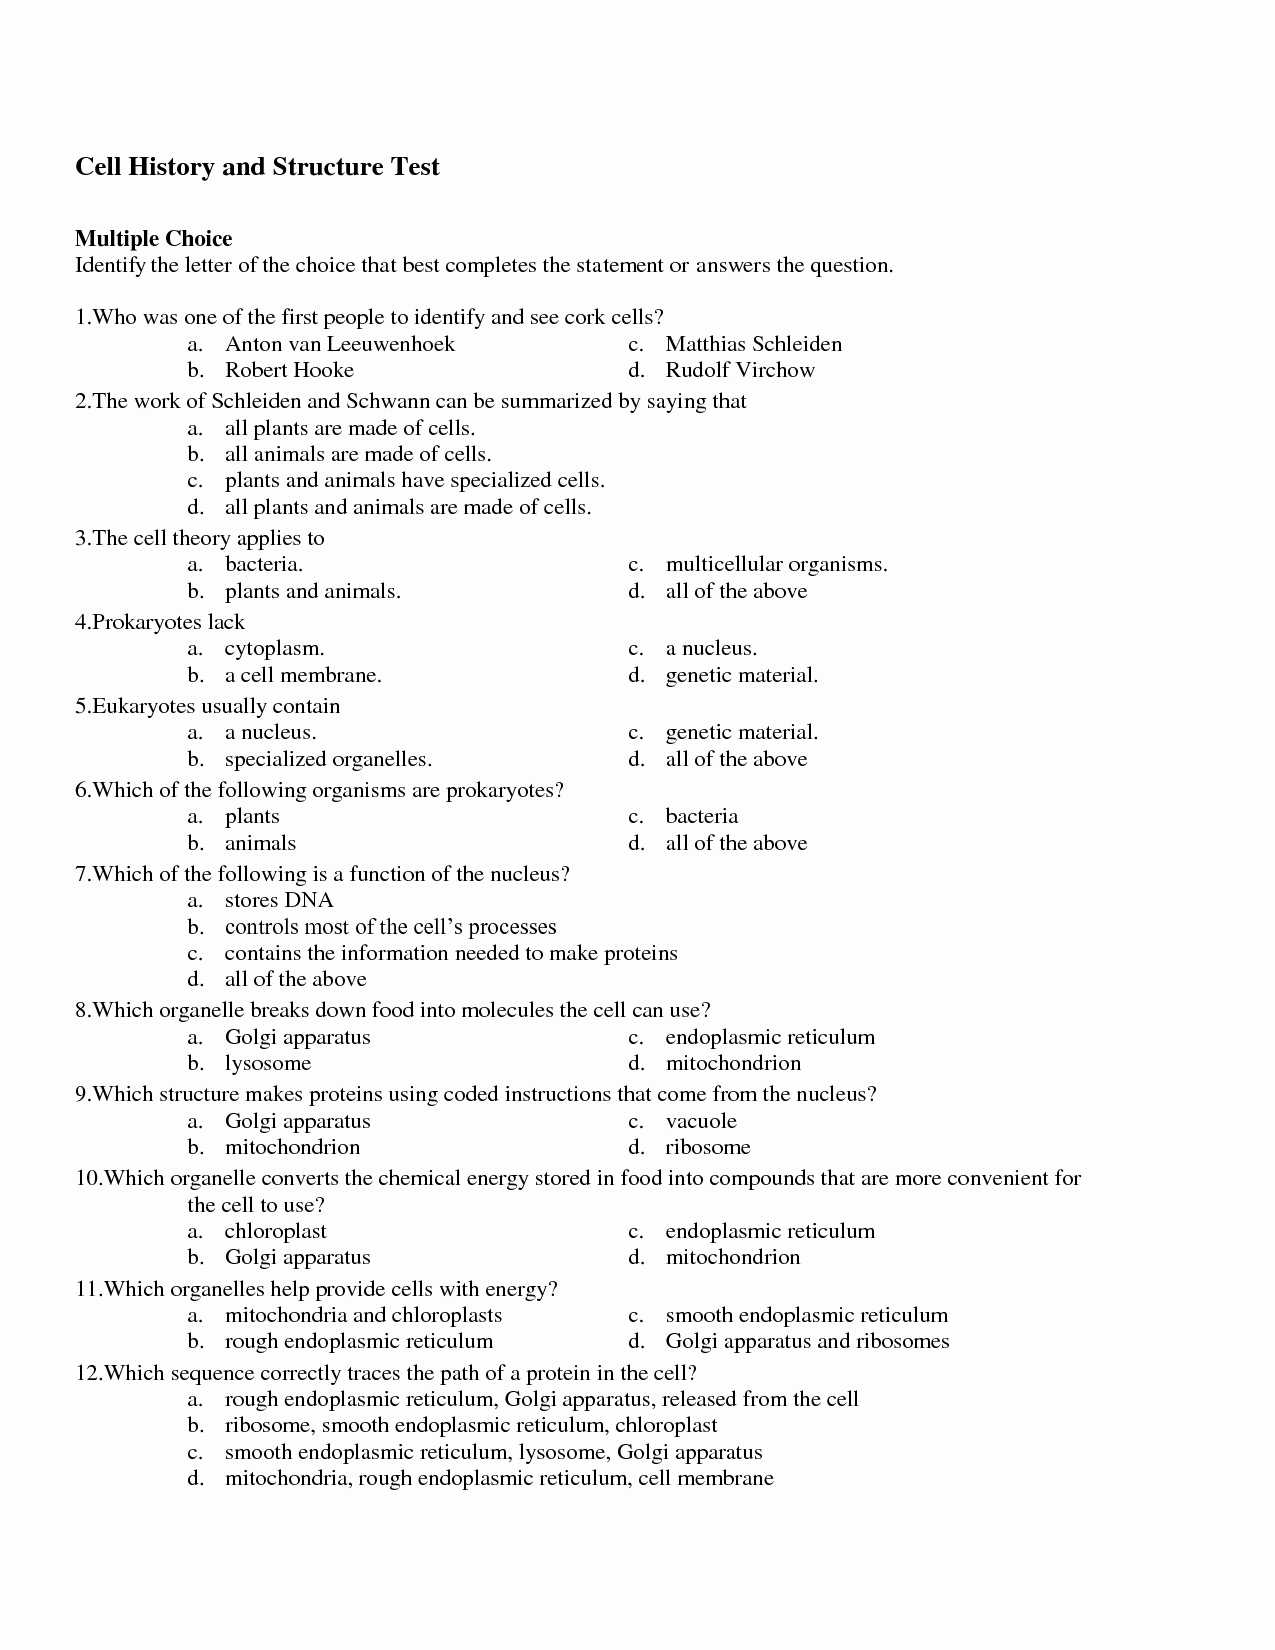 Function Of the organelles Worksheet Elegant 14 Best Of Cell Structure and Function Worksheet